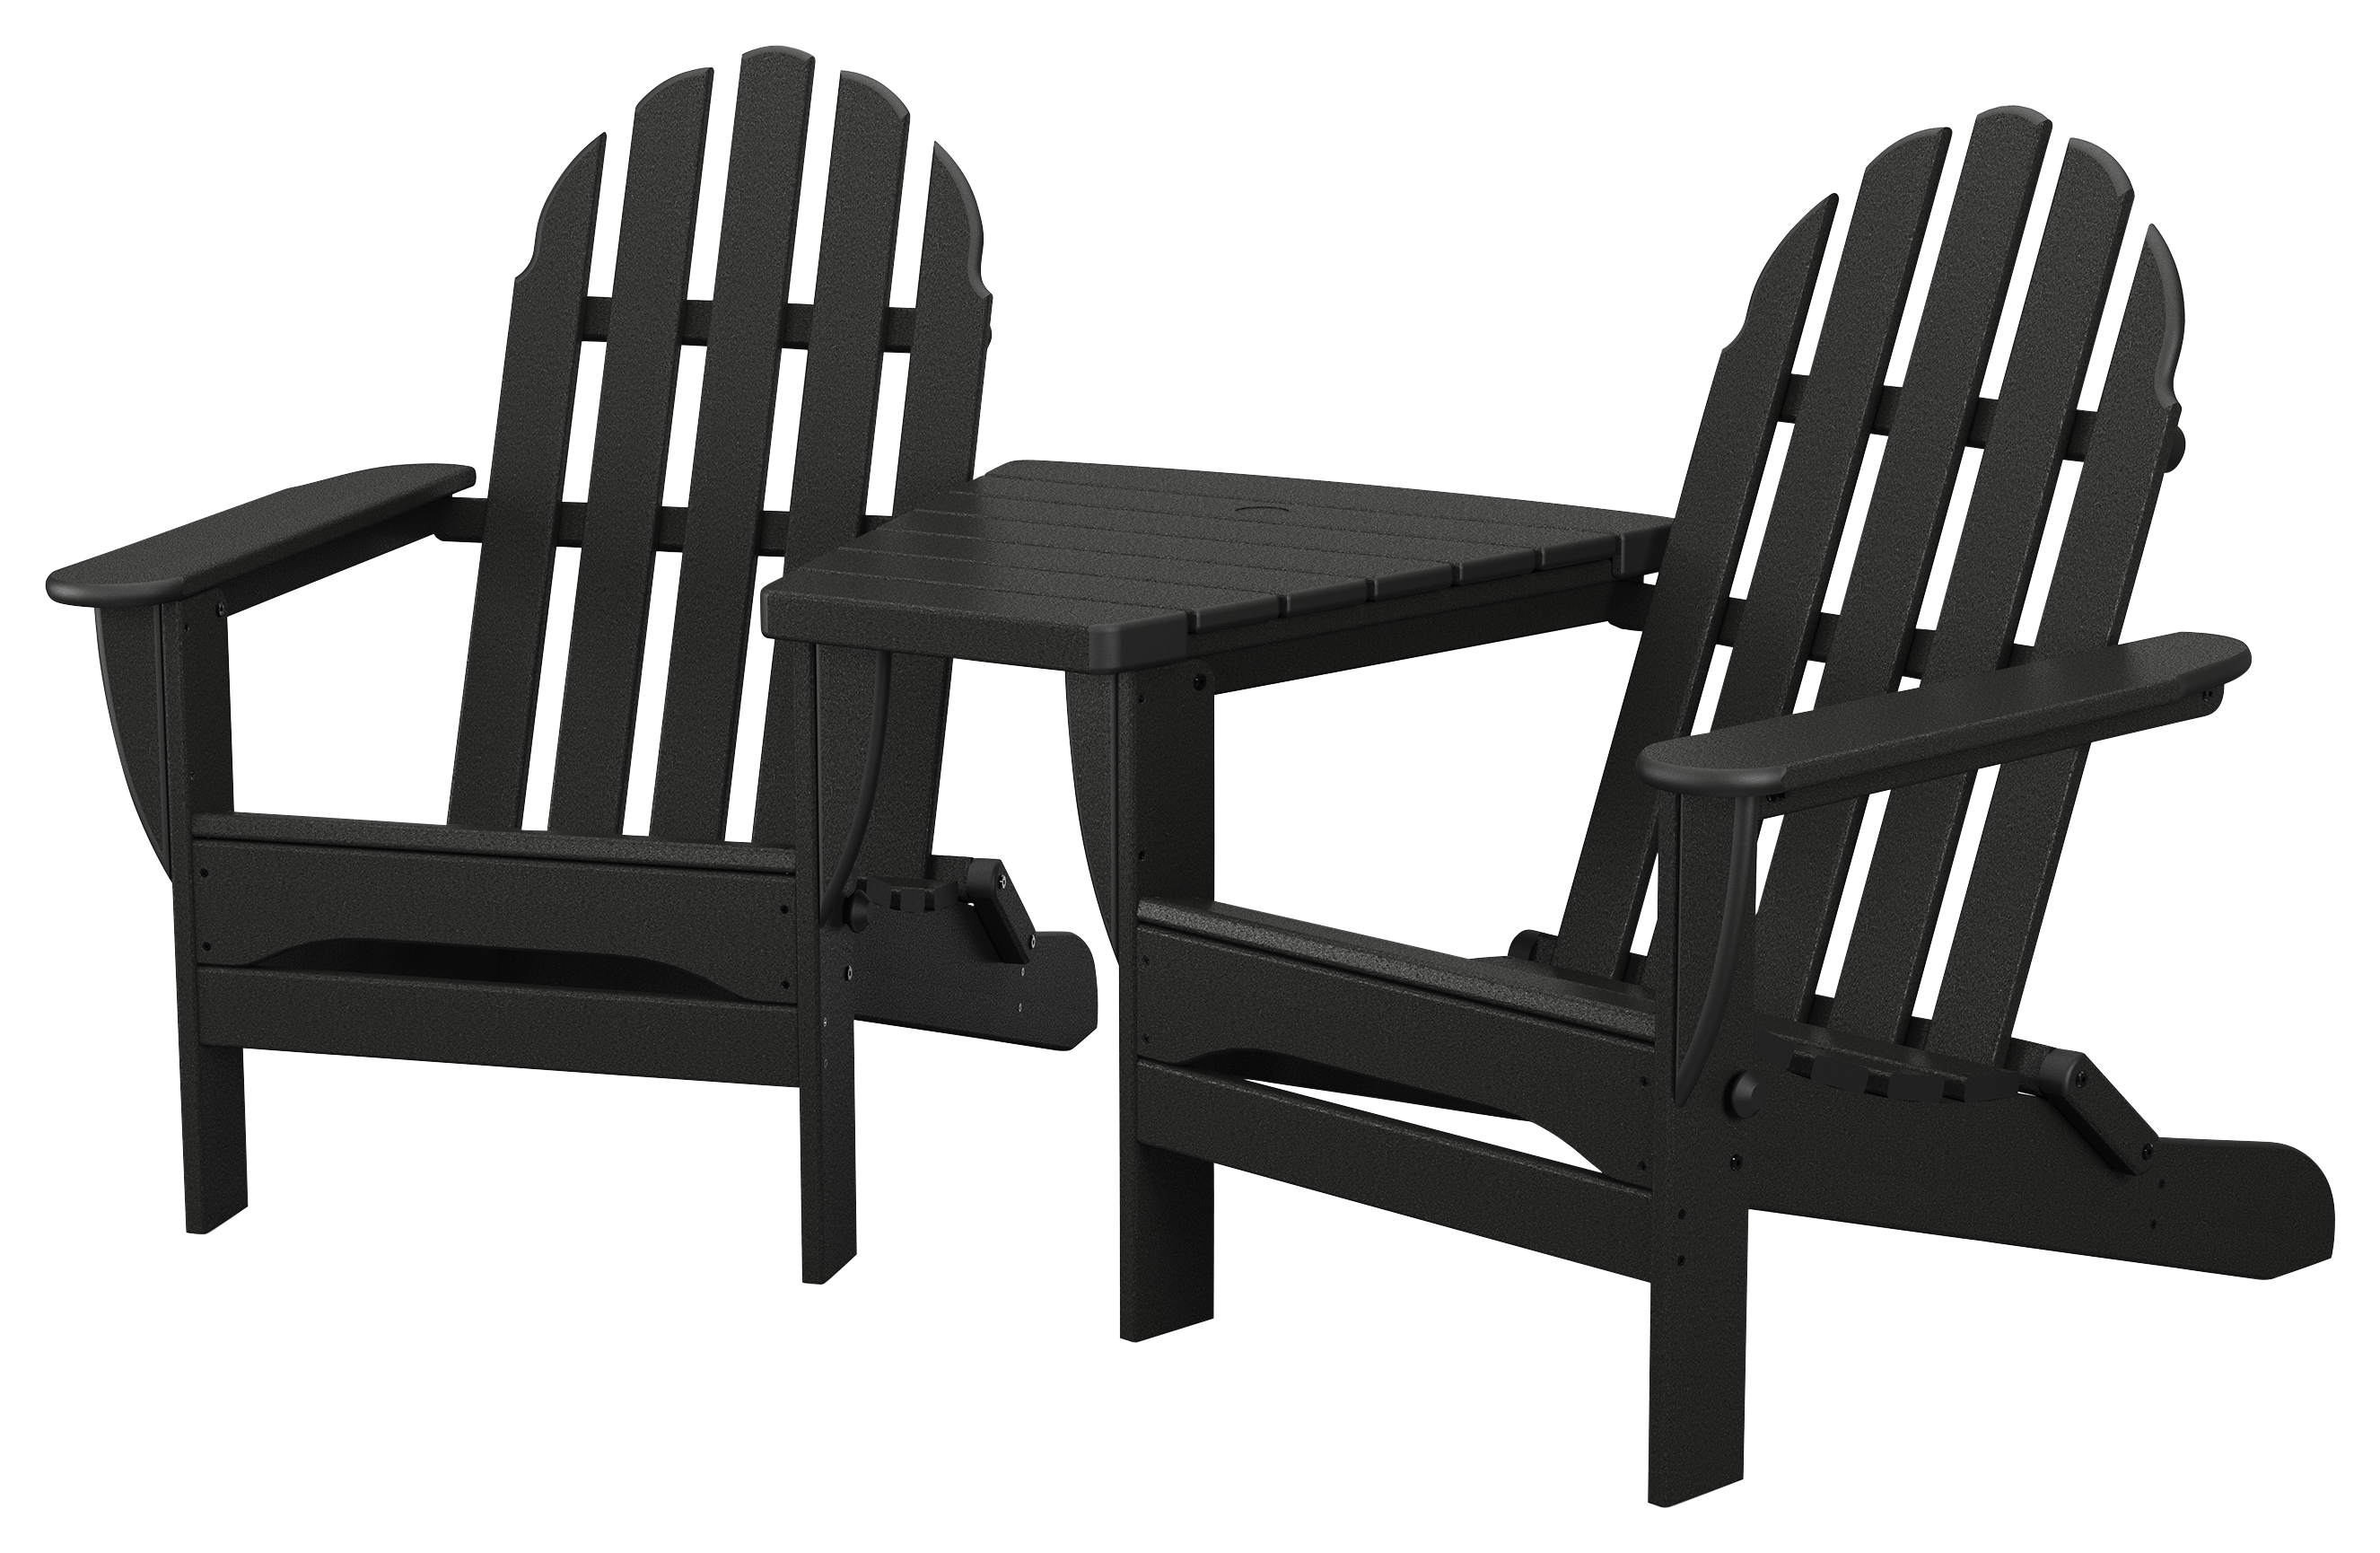 POLYWOOD Classic Folding Adirondack Chairs with Connecting Table